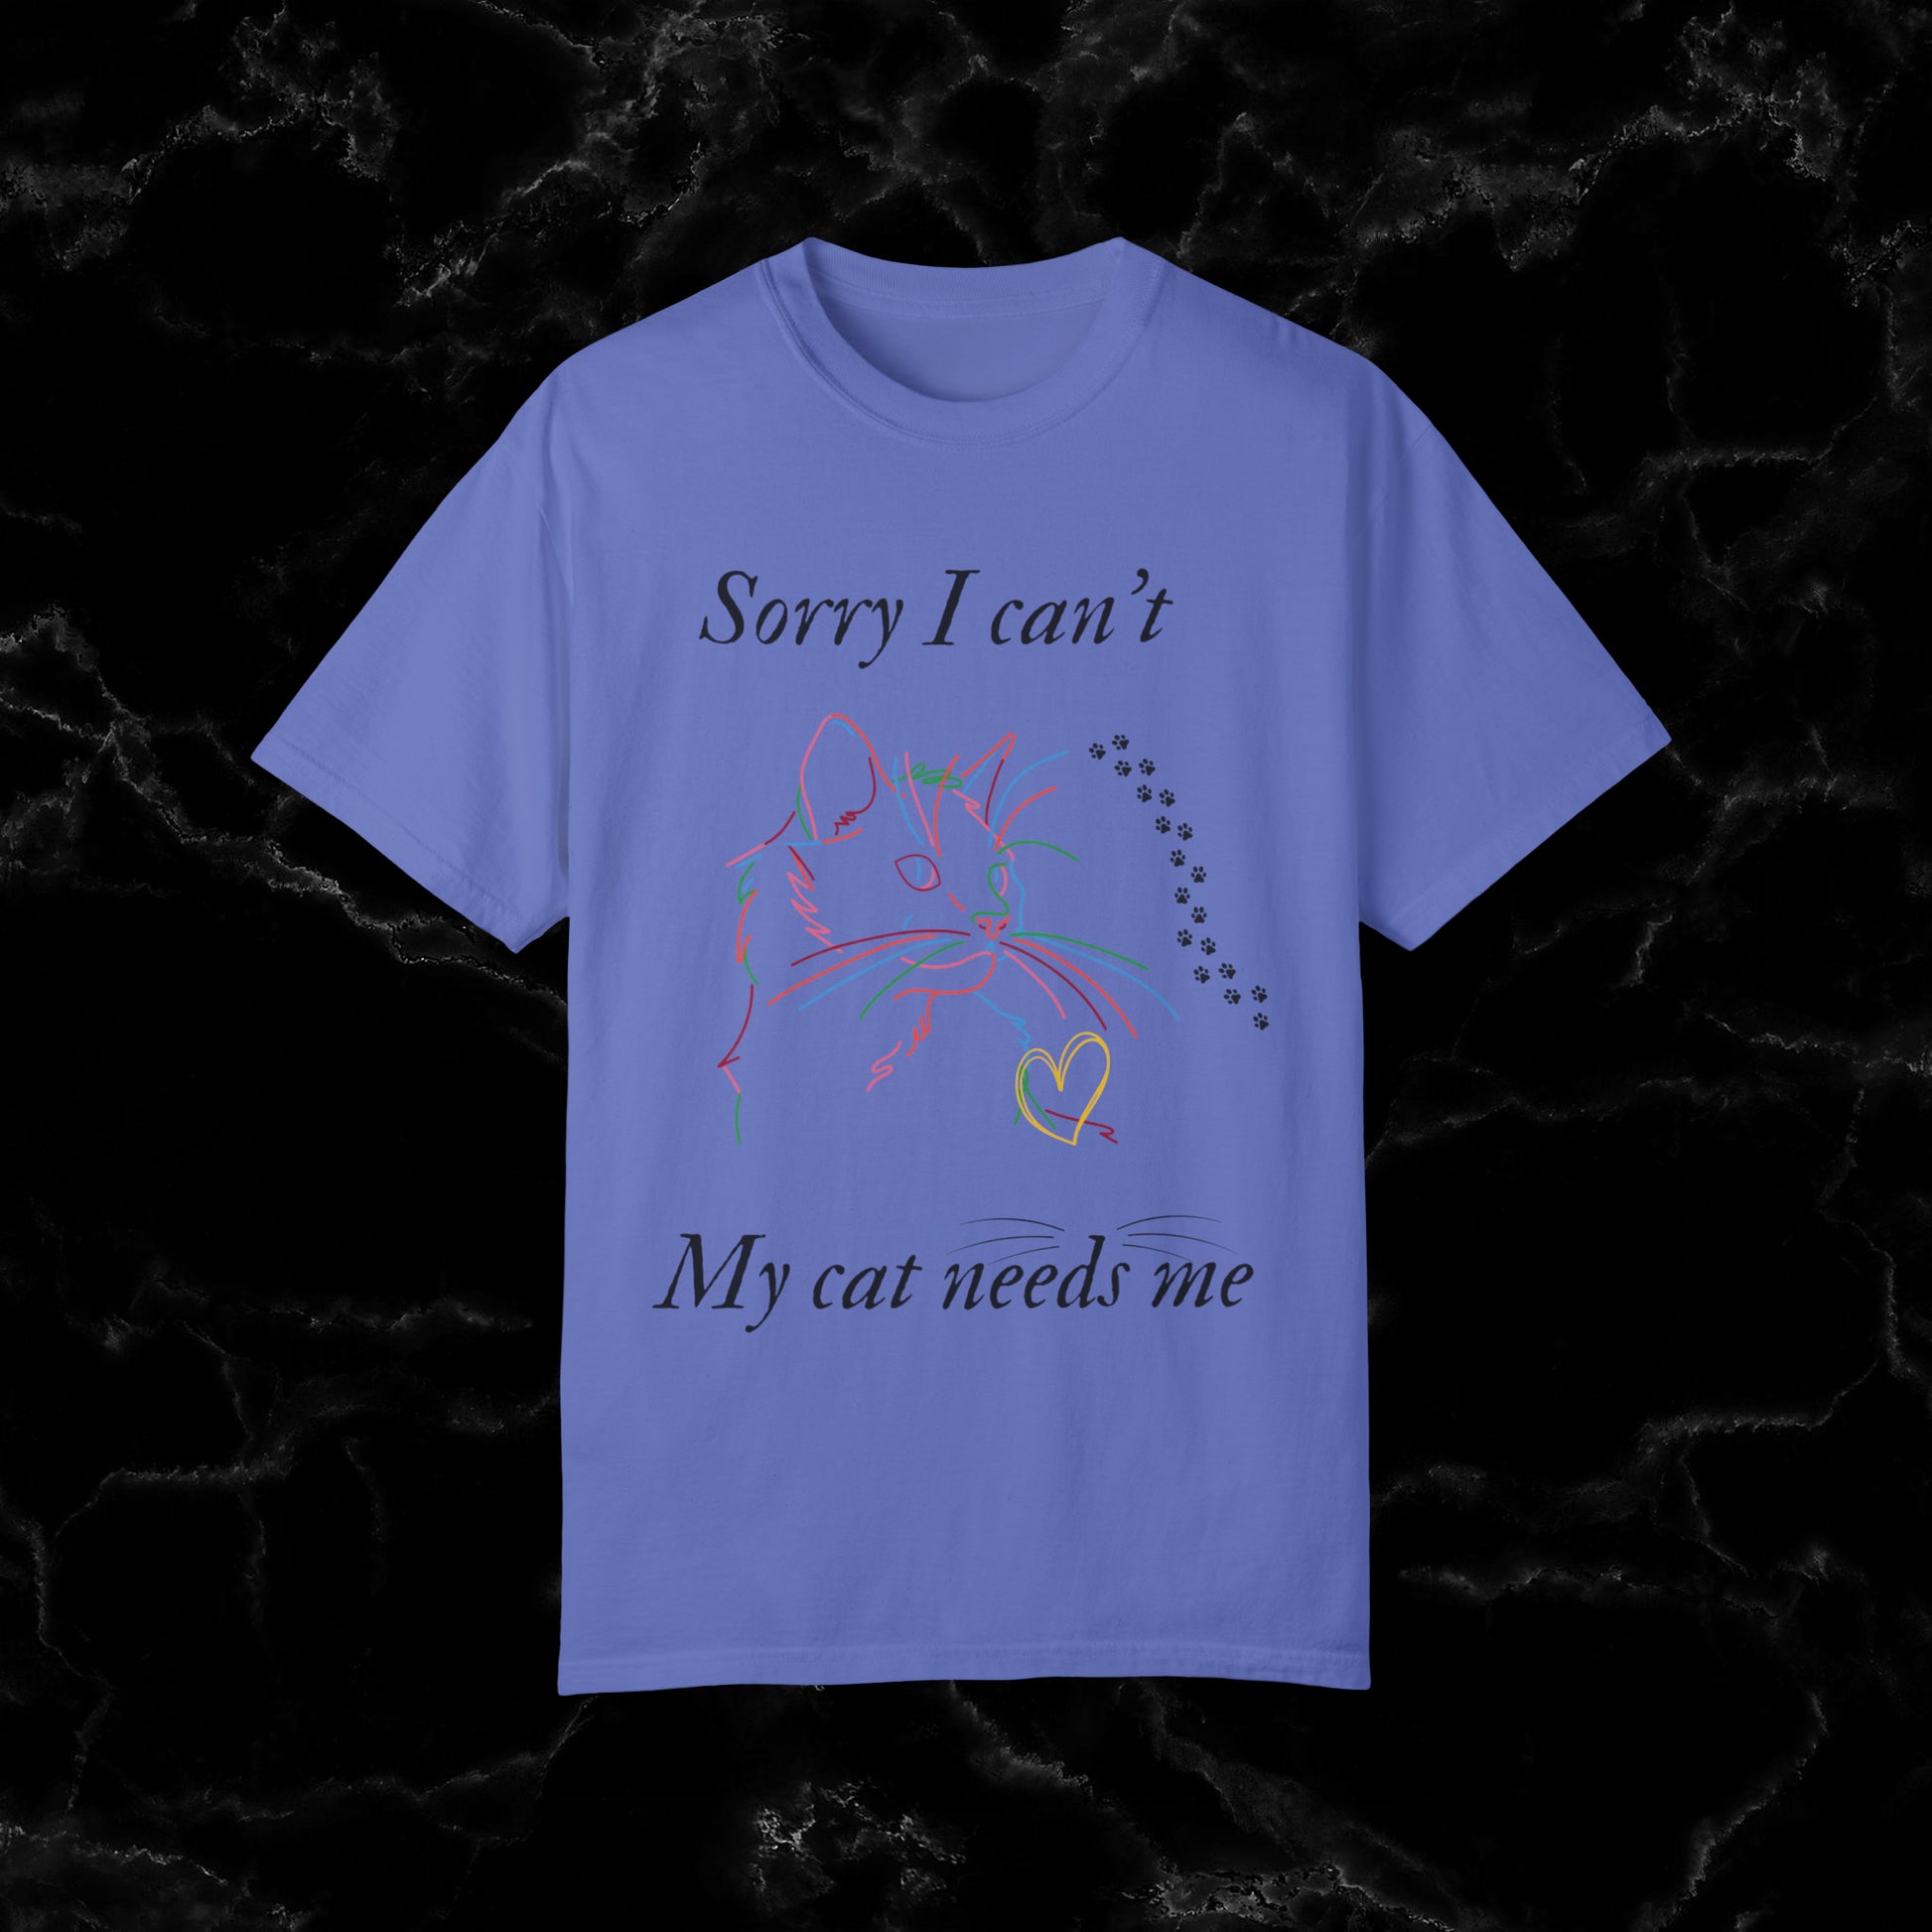 Sorry I Can't, My Cat Needs Me T-Shirt - Perfect Gift for Cat Moms and Animal Lovers T-Shirt Flo Blue S 